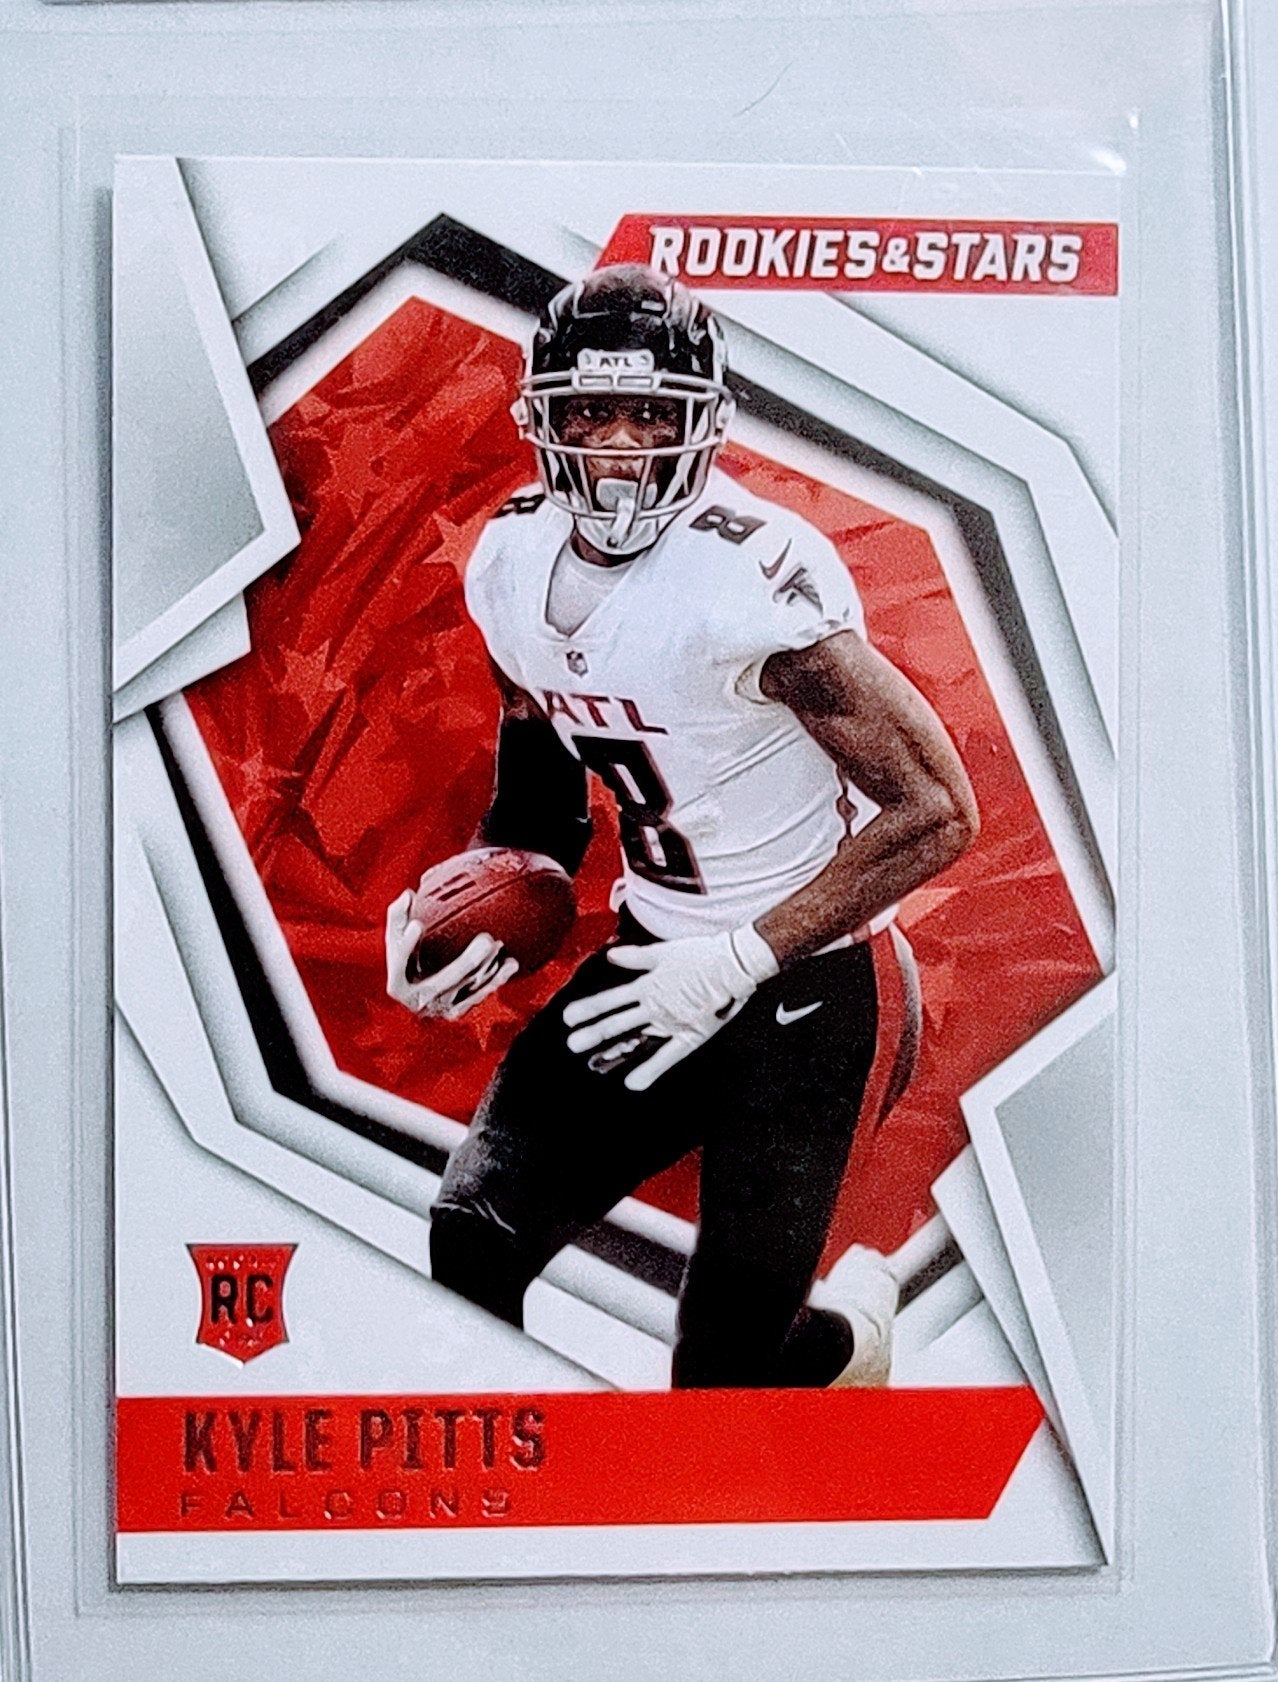 2021 Panini Rookies and Stars Kyle Pitts Rookie Football Card AVM1 simple Xclusive Collectibles   